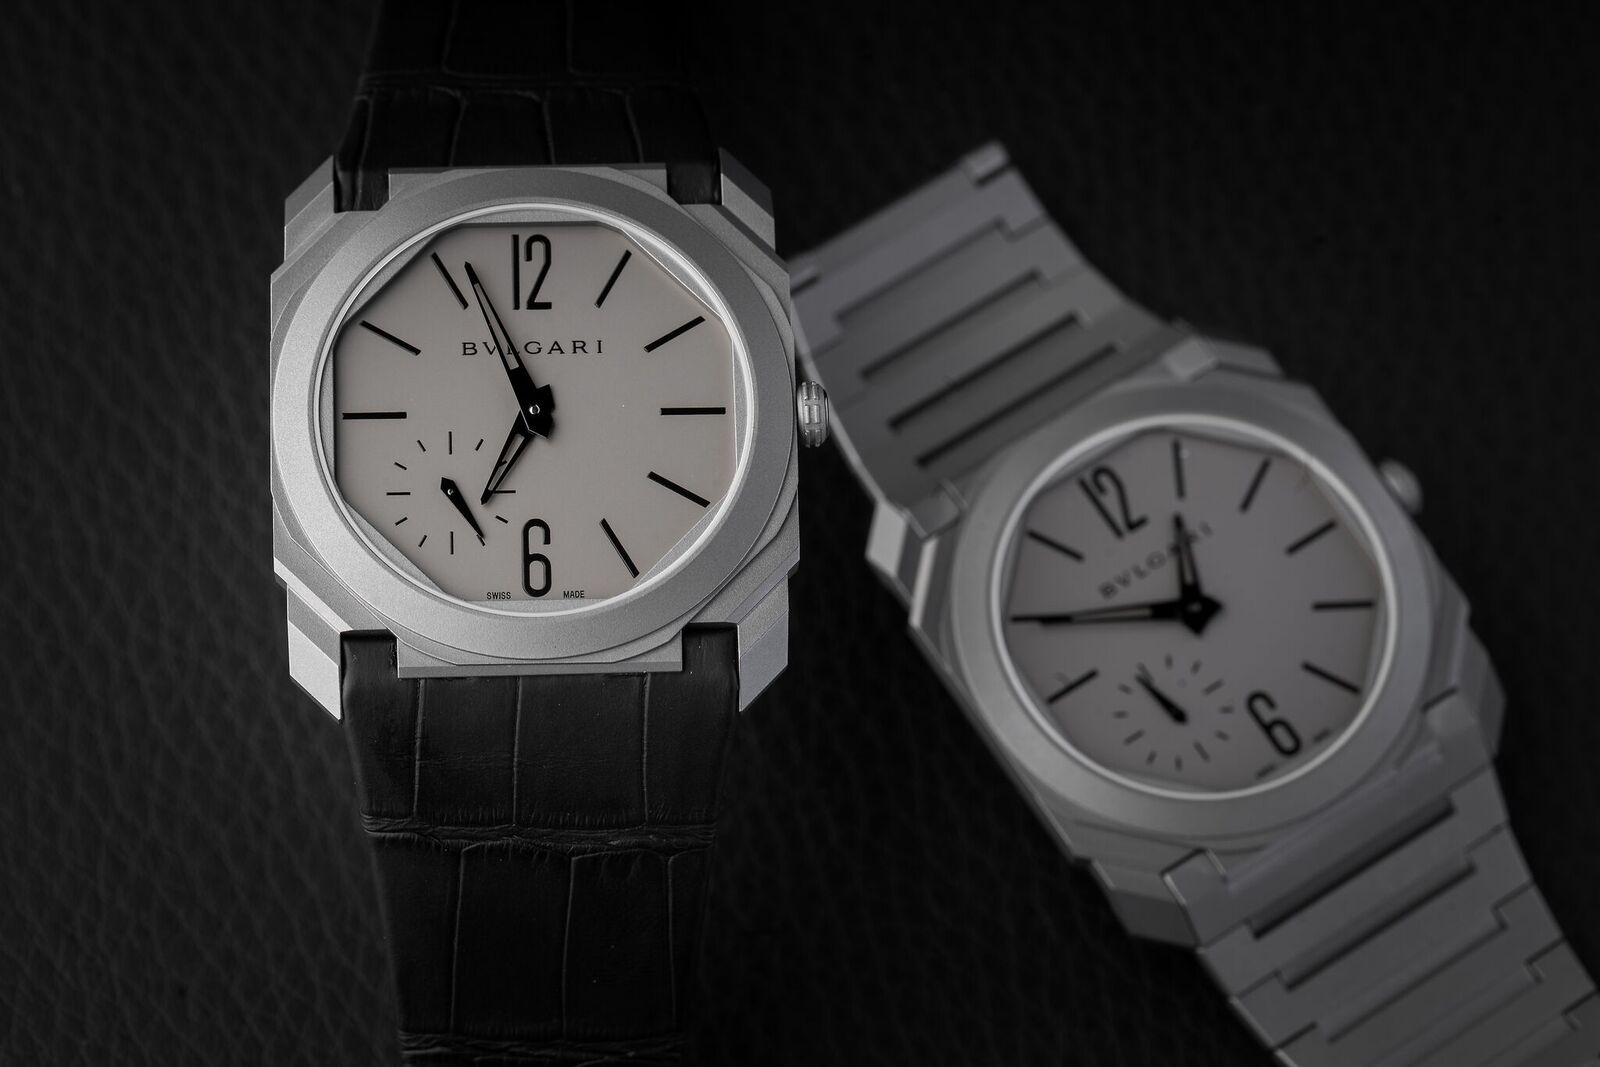 Bulgari Presents Octo Finissimo Automatic: The Slimmest Self-Winding Watch Today